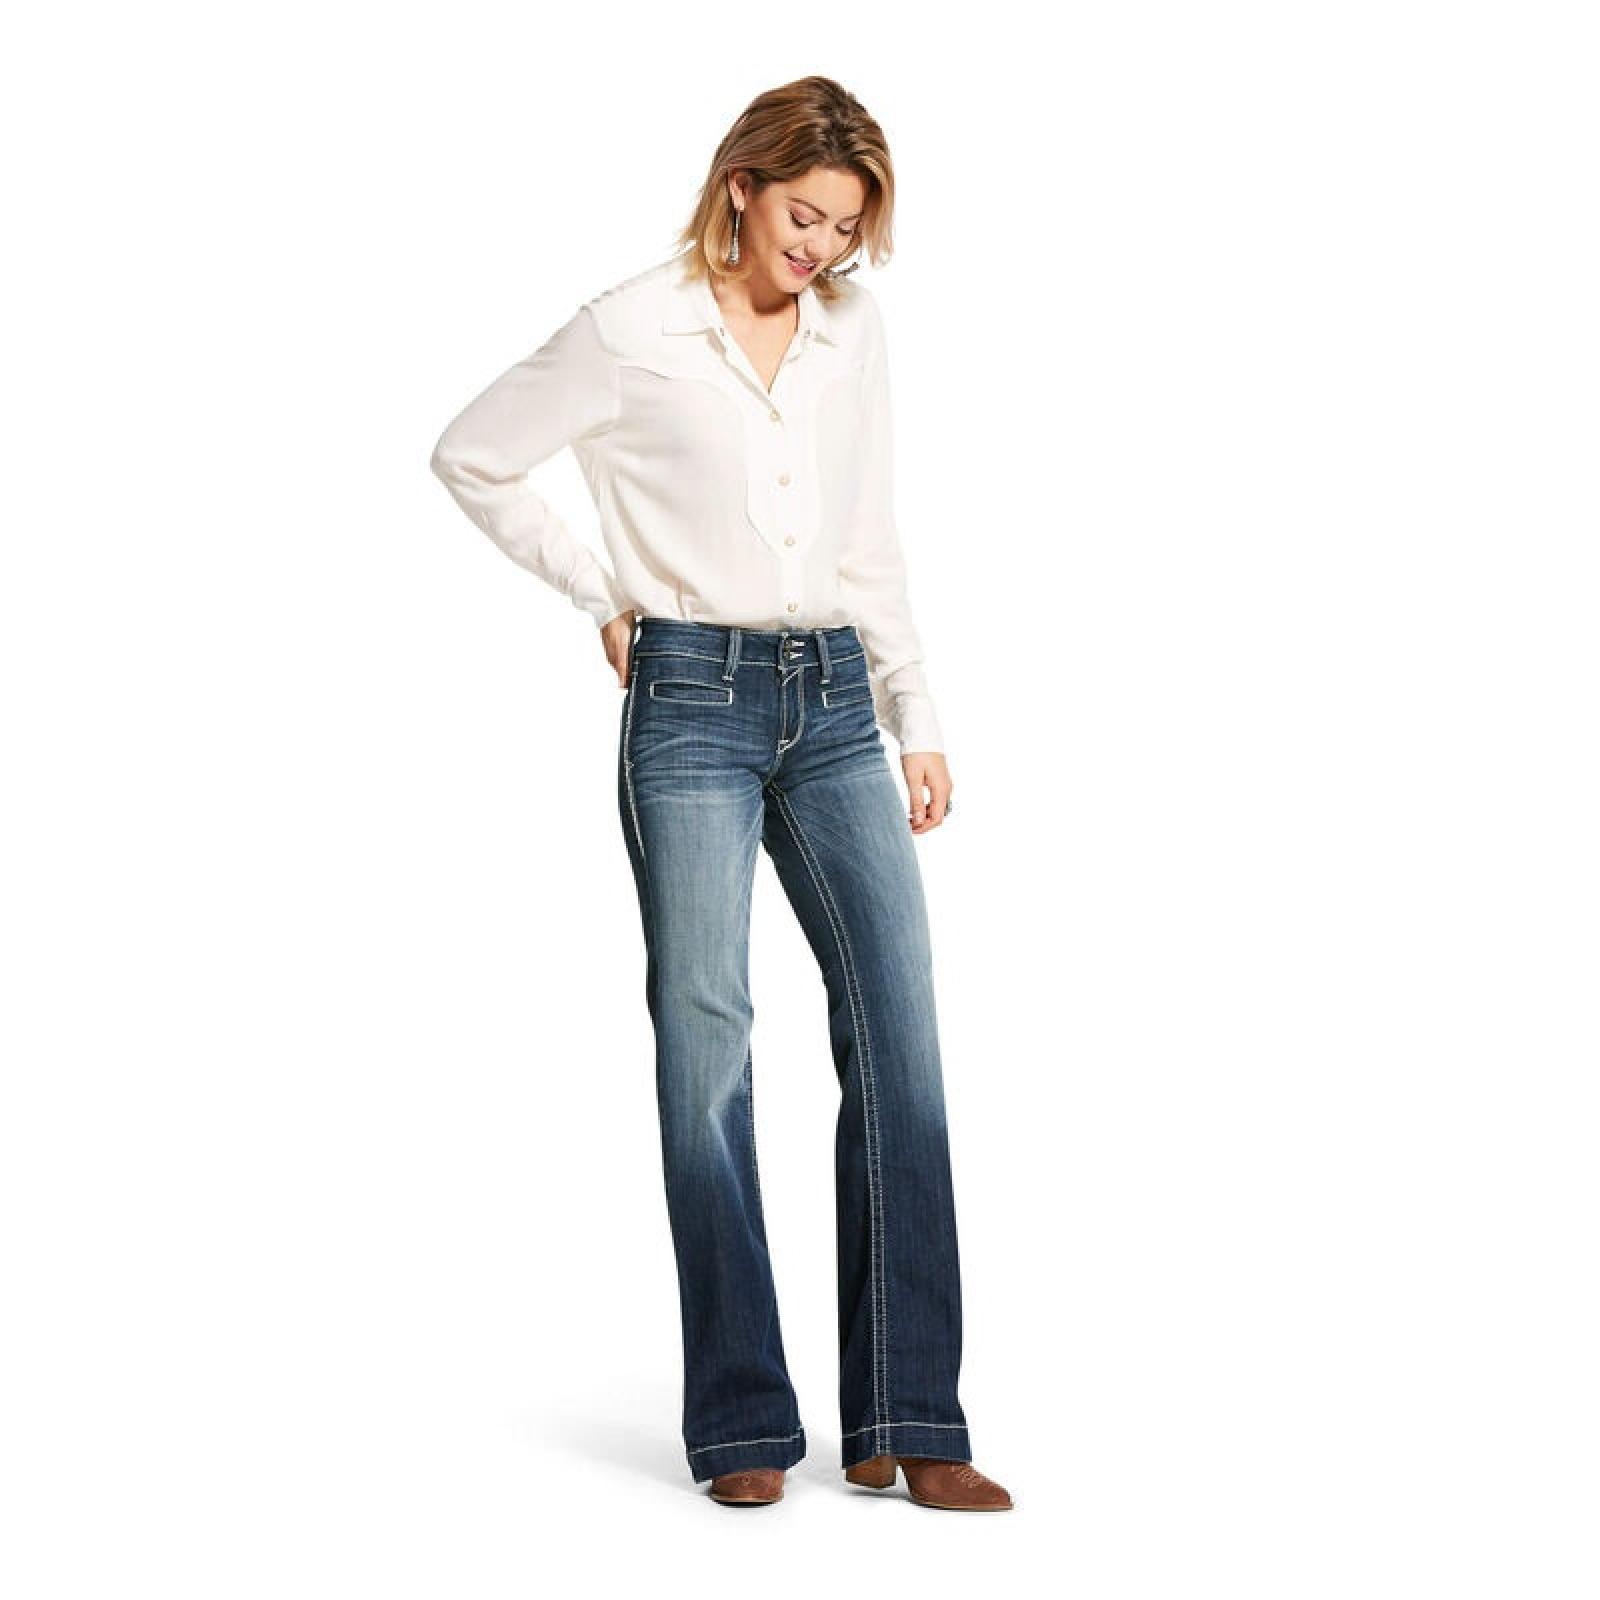 Ariat Trouser Mid Rise Stretch Entwined Wide Leg Jean